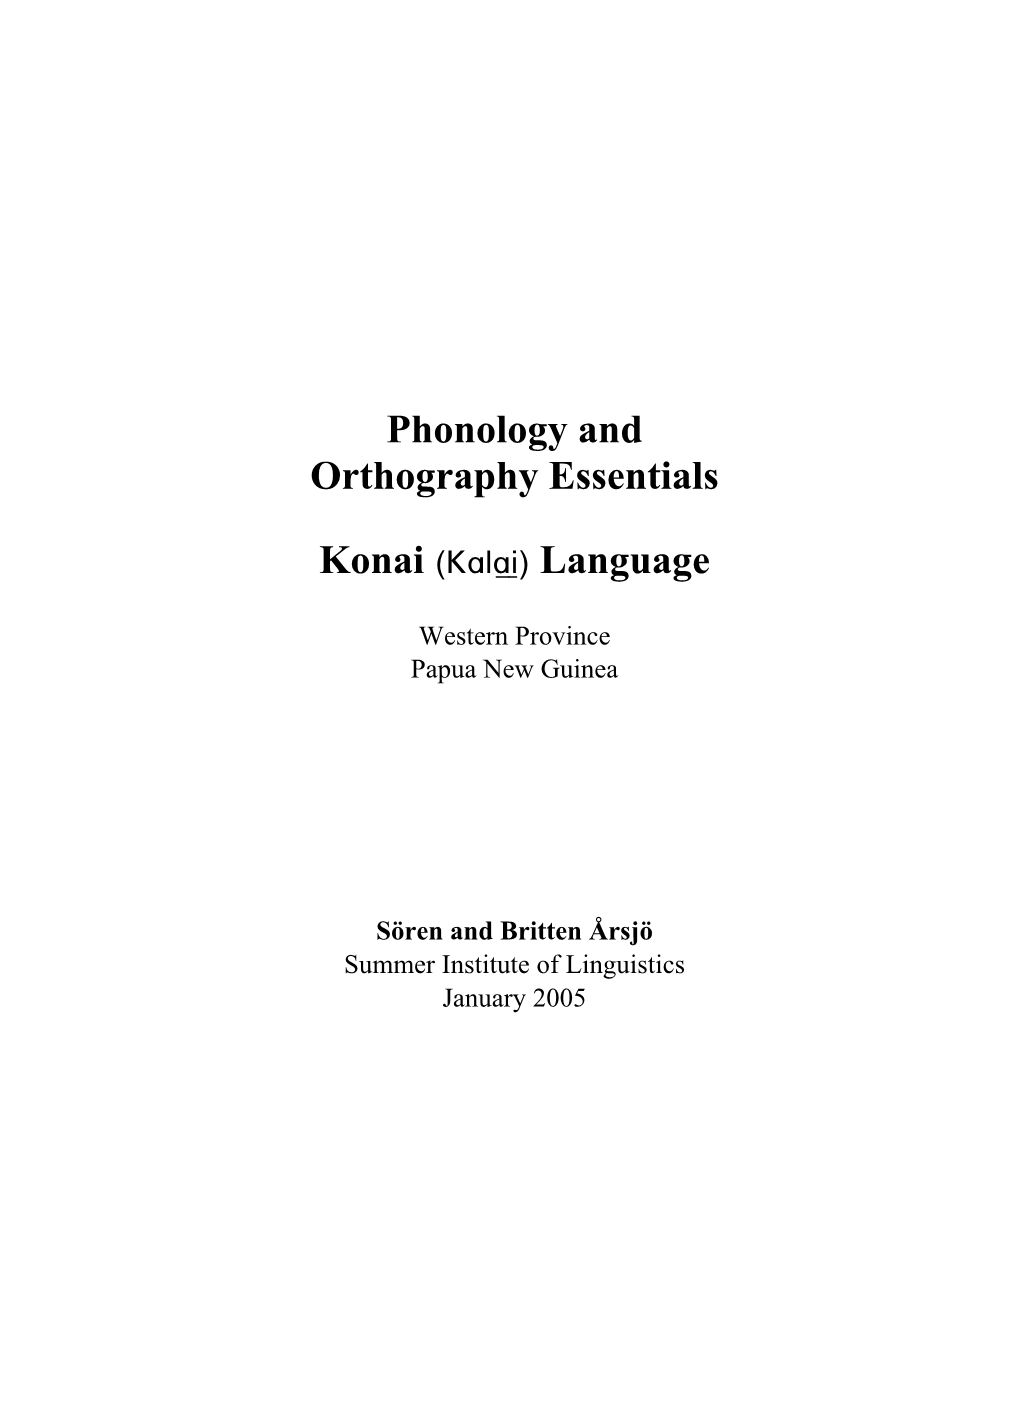 Phonology and Orthography Essentials